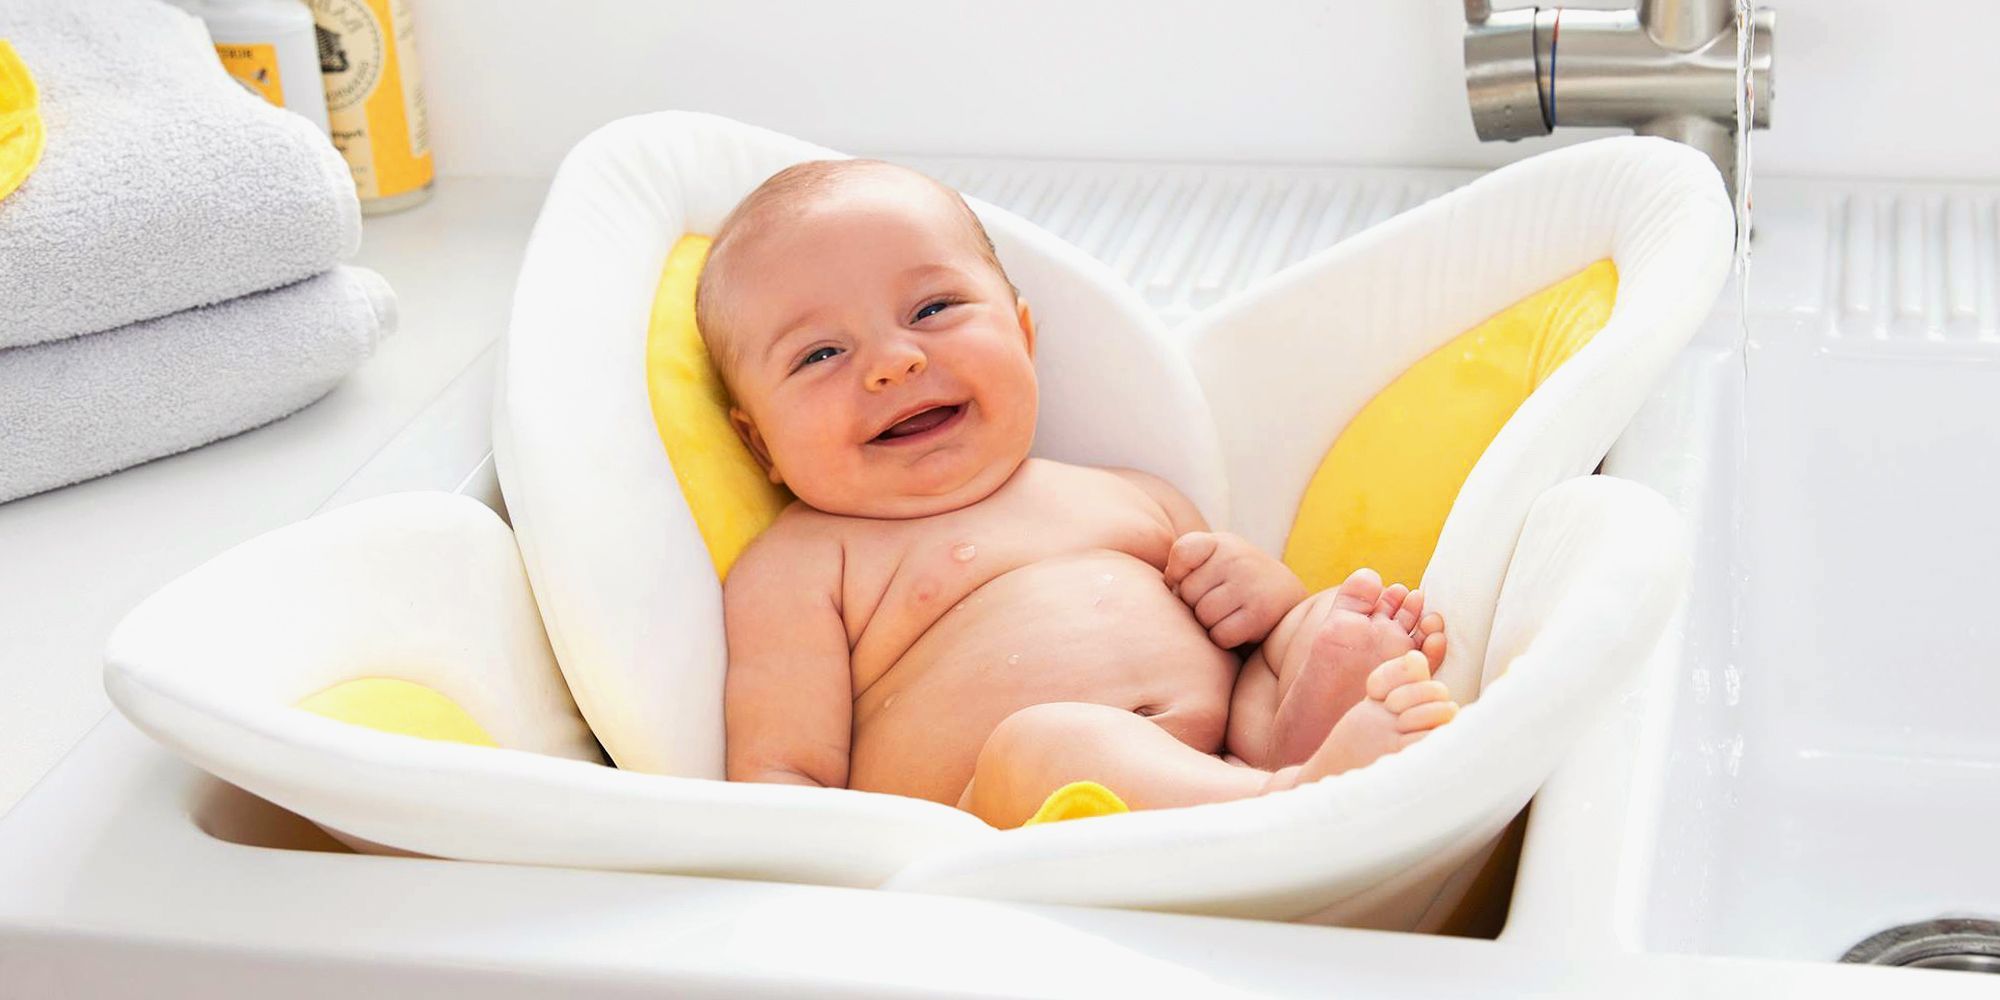 Bathing Newborns and Babies Safety and HowTo Guide ReviewThis